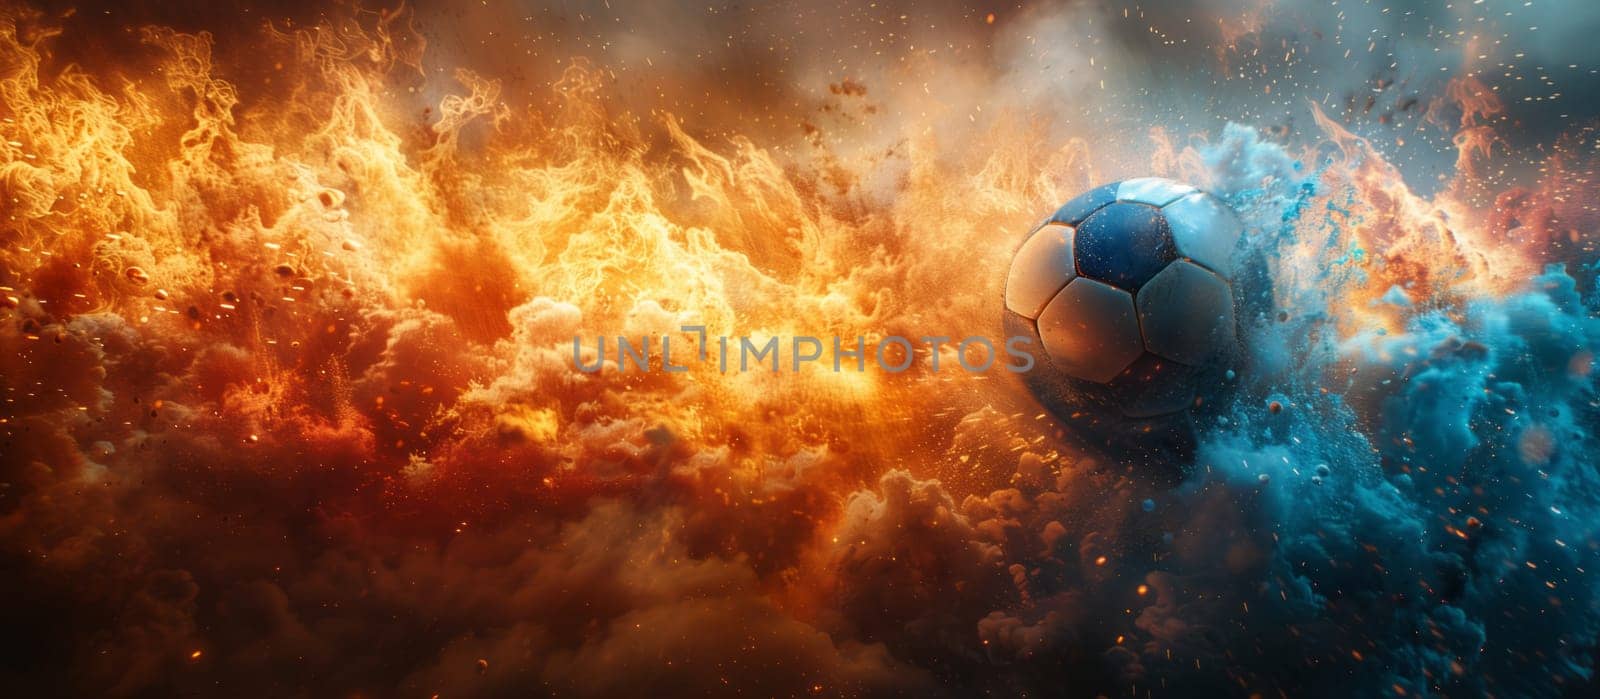 The sky is filled with flames and smoke around the soccer ball by richwolf